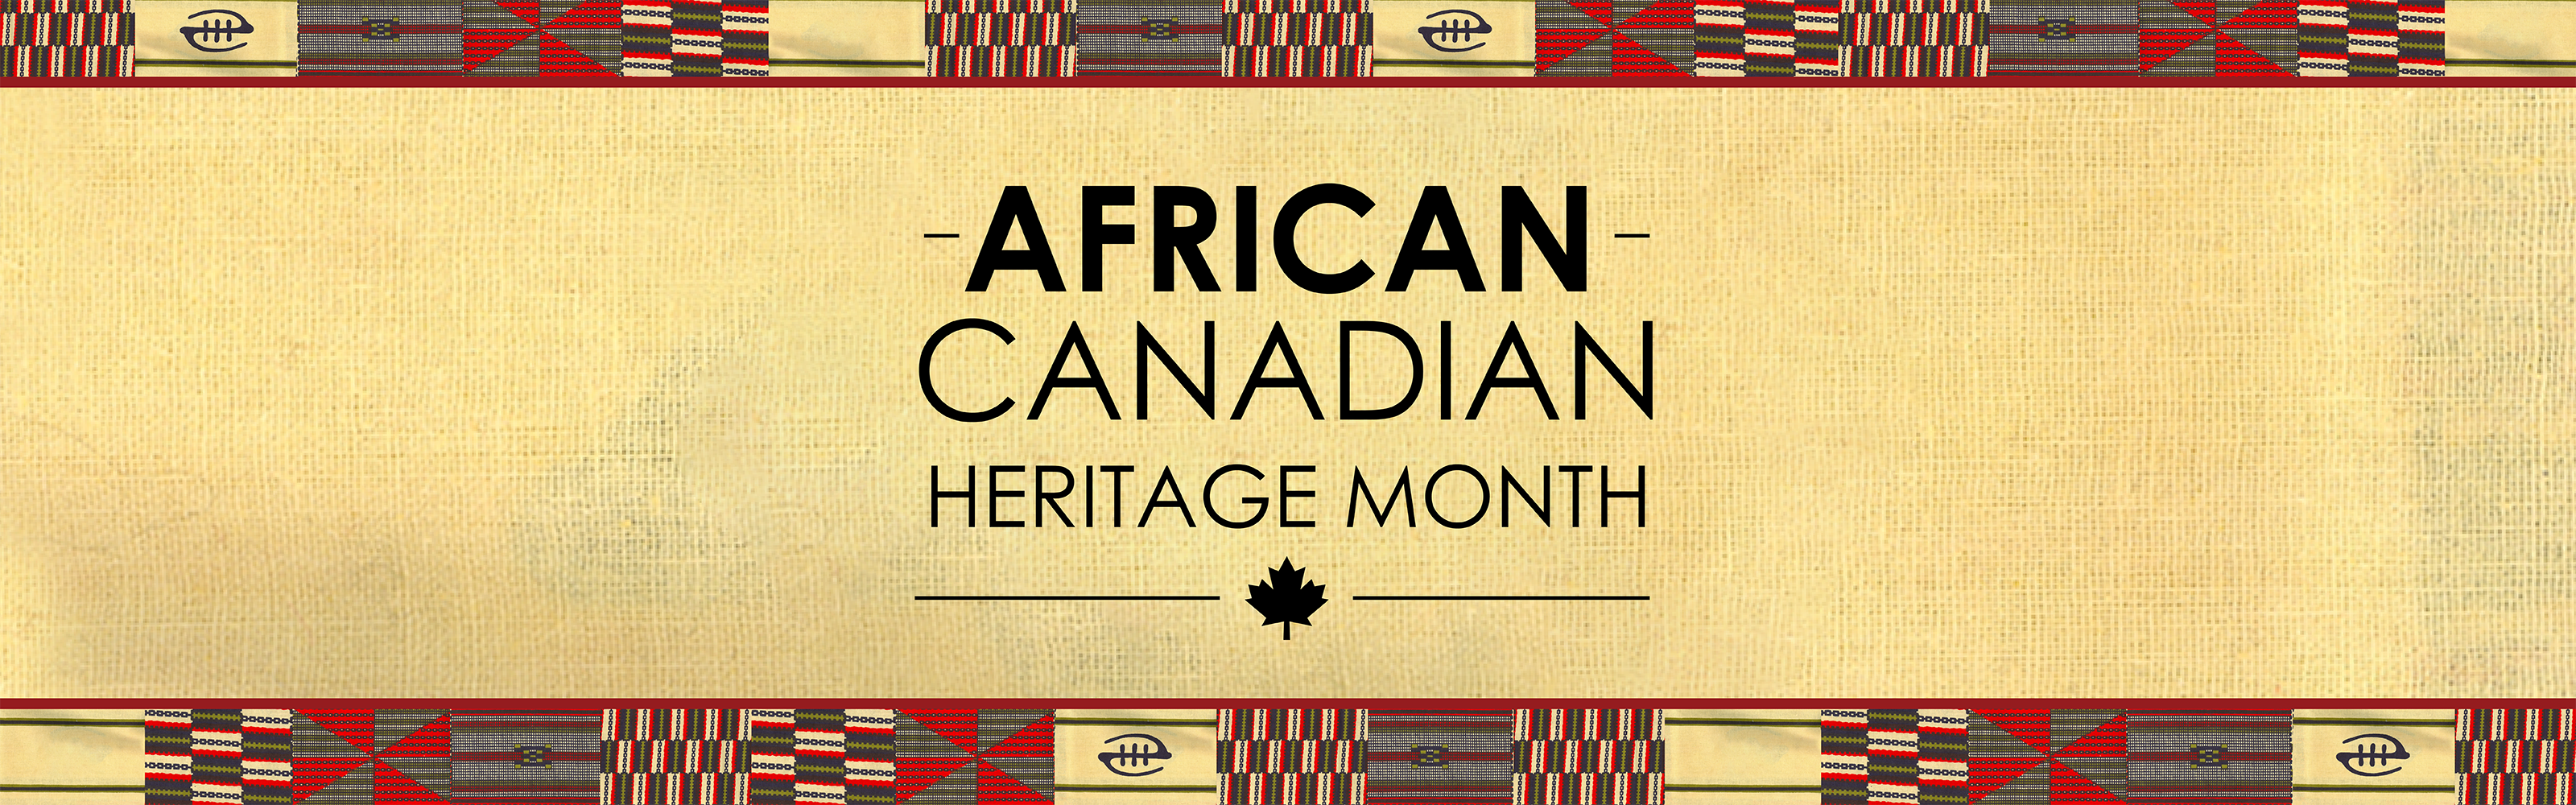 An image consists of Kente cloth with African Canadian Heritage Month written on it.